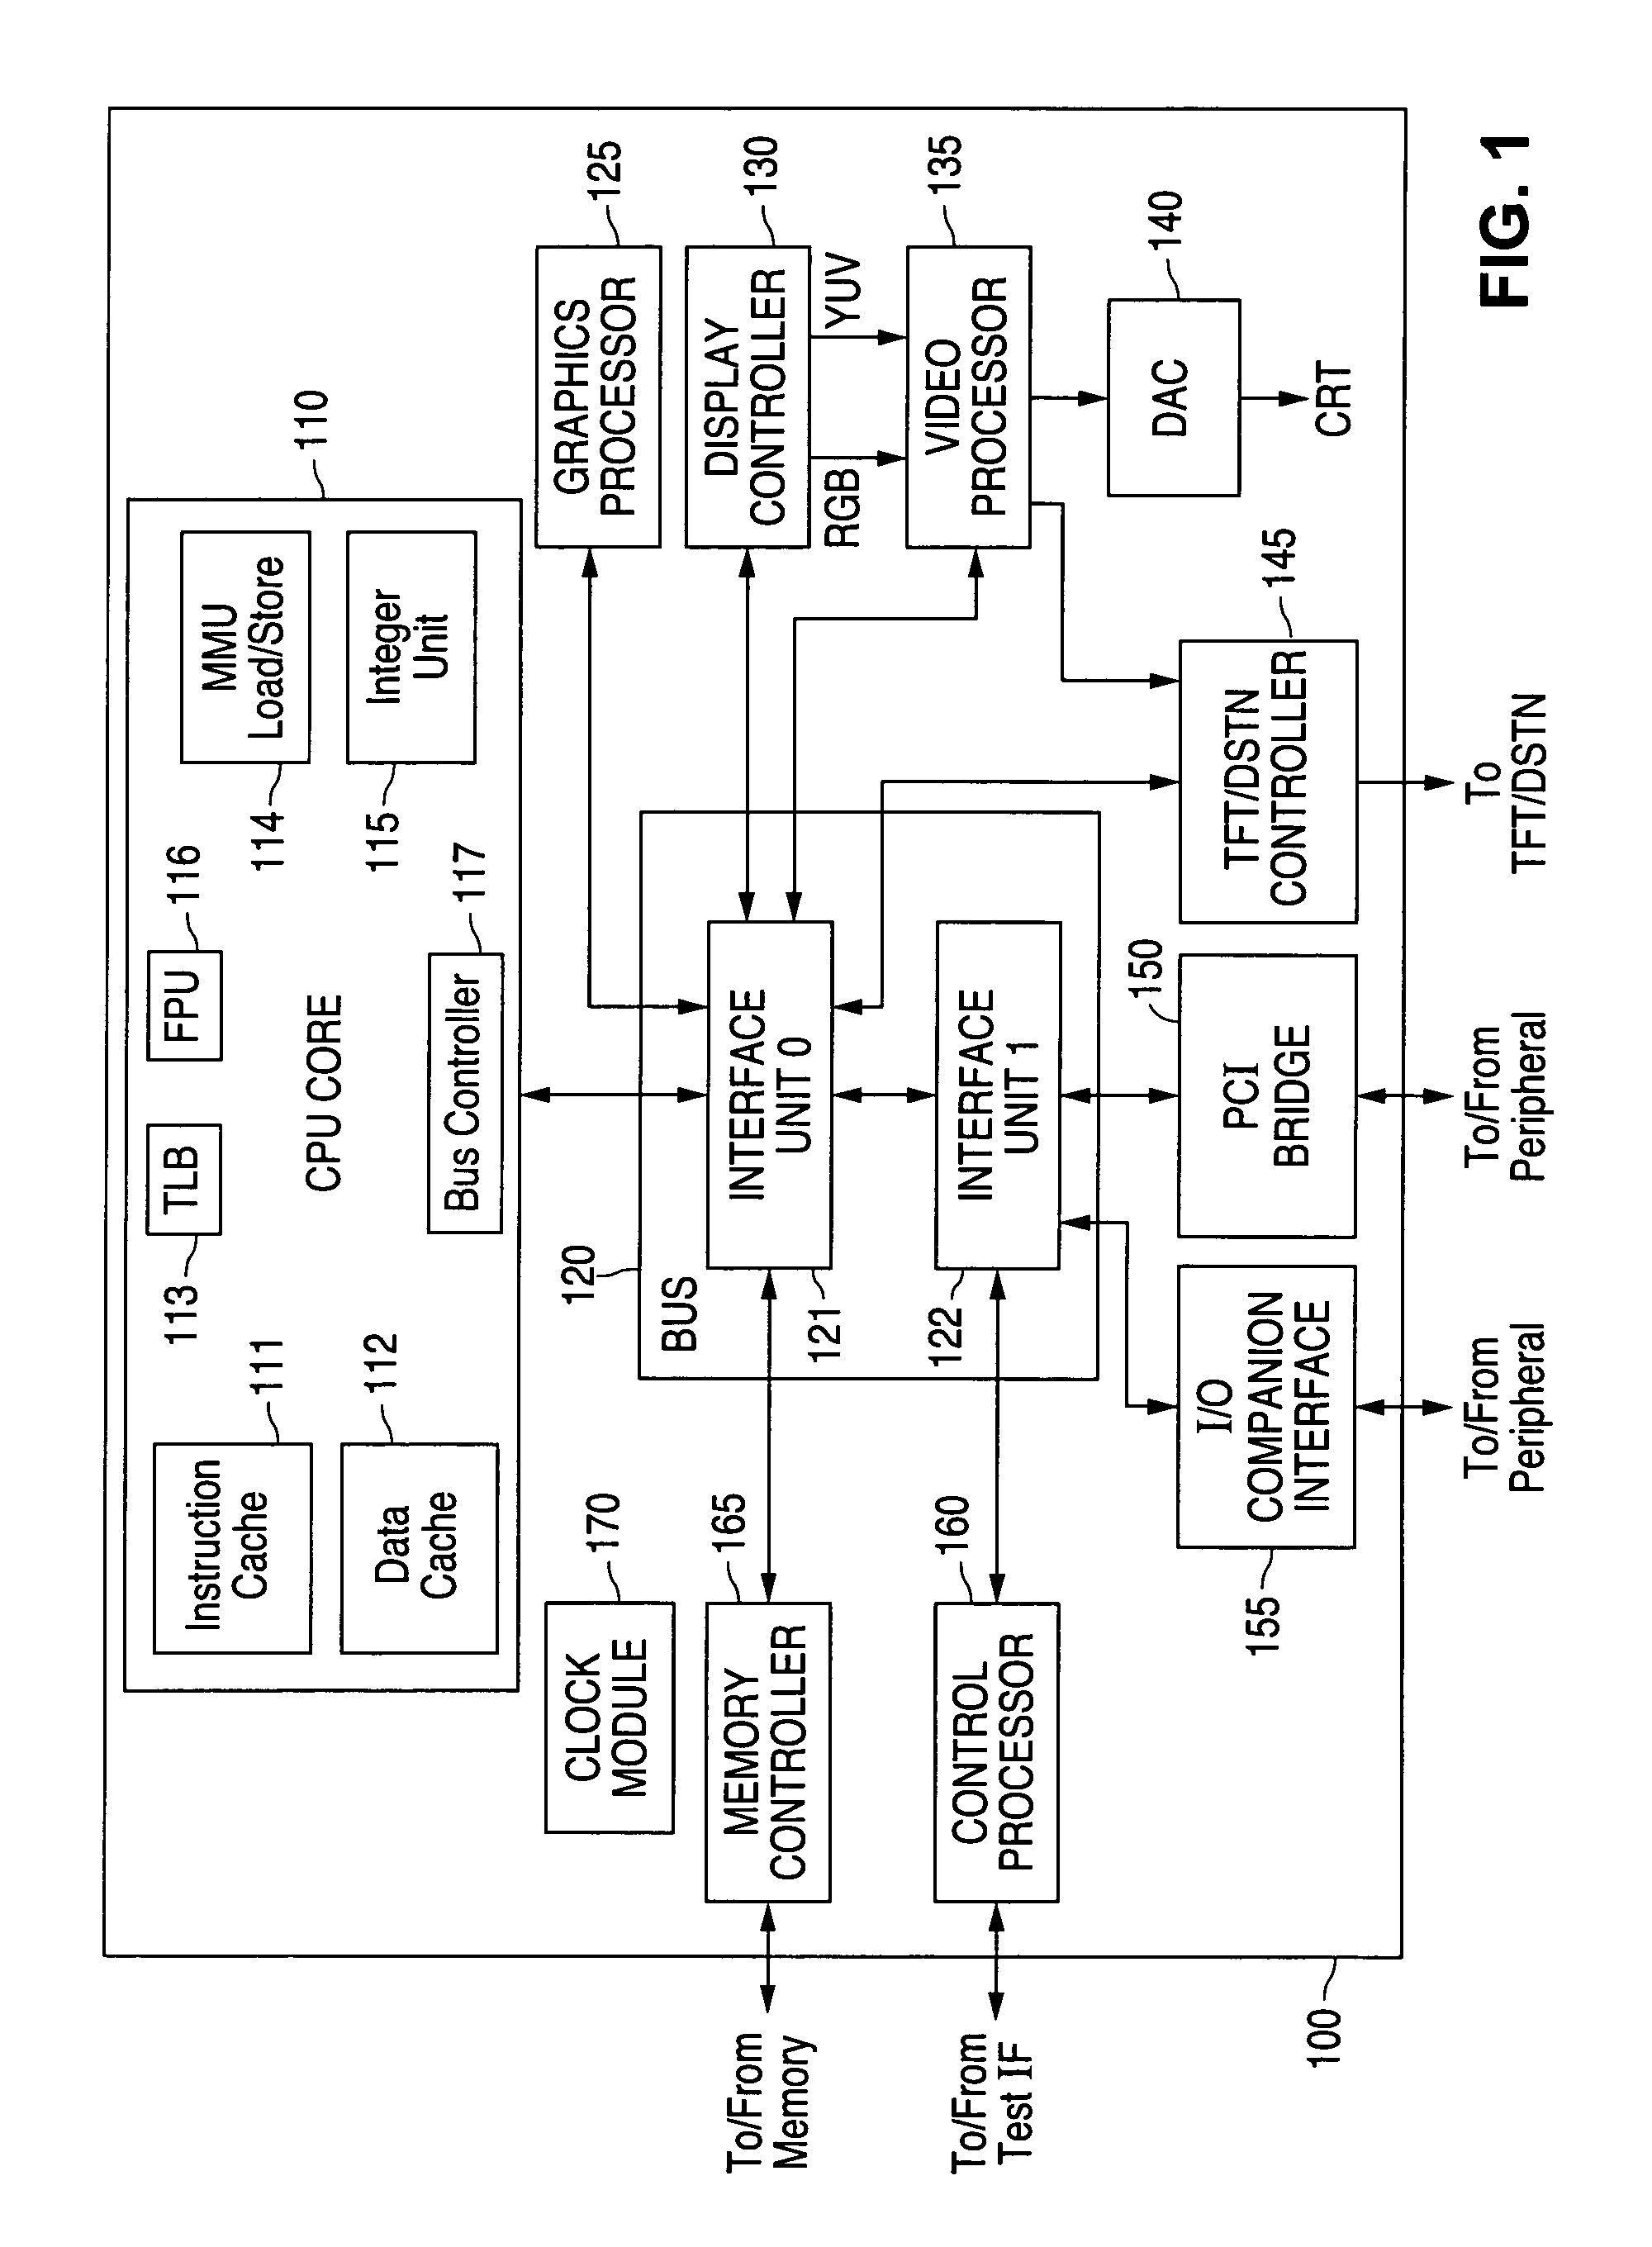 Method and system for providing a shared write driver